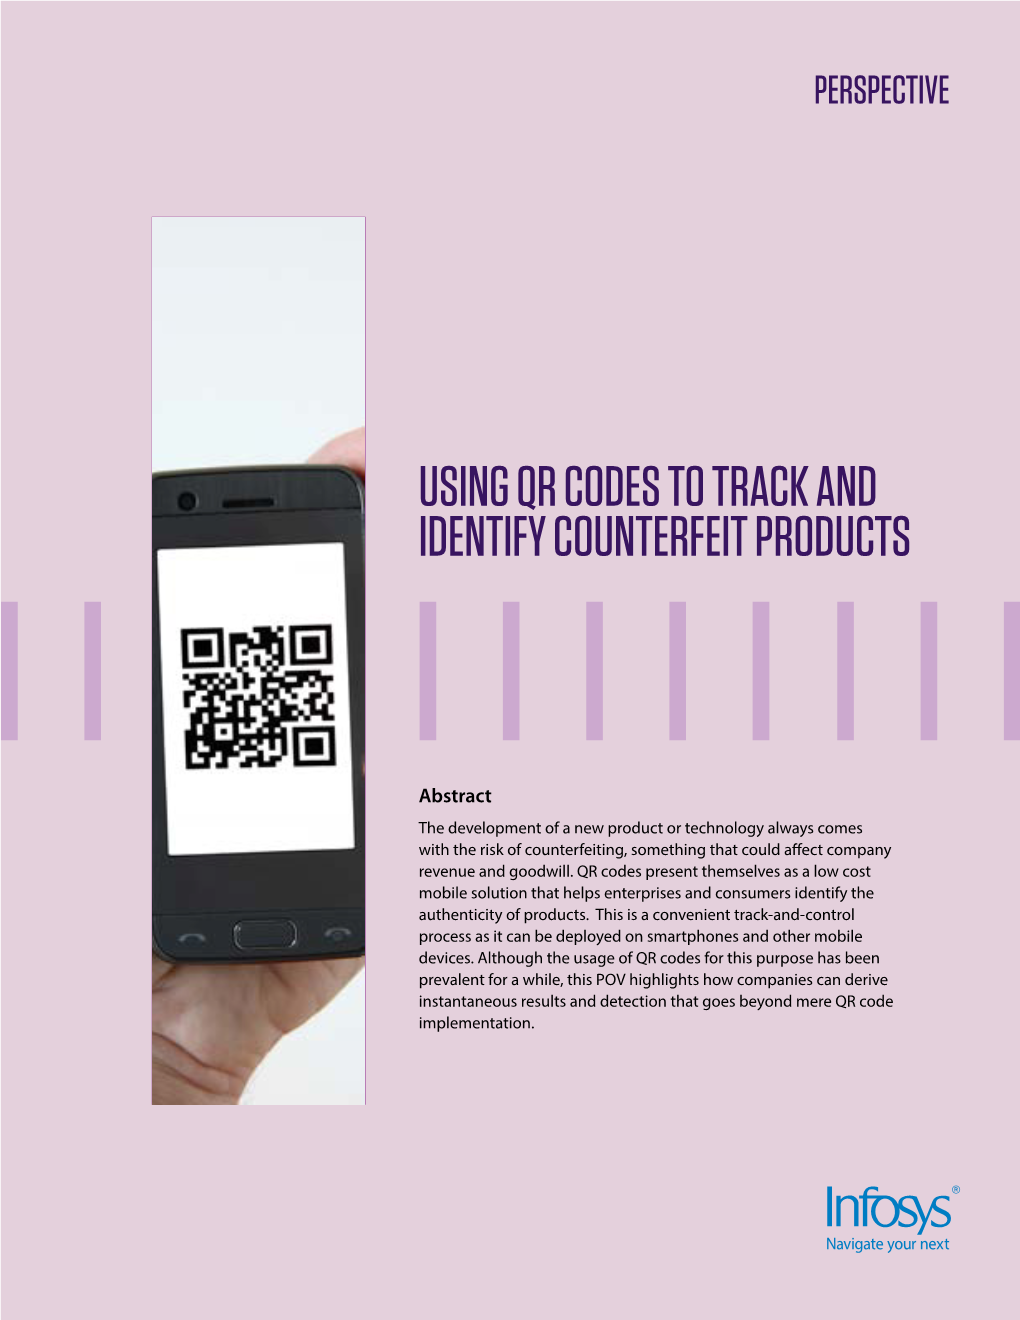 Using Qr Codes to Track and Identify Counterfeit Products